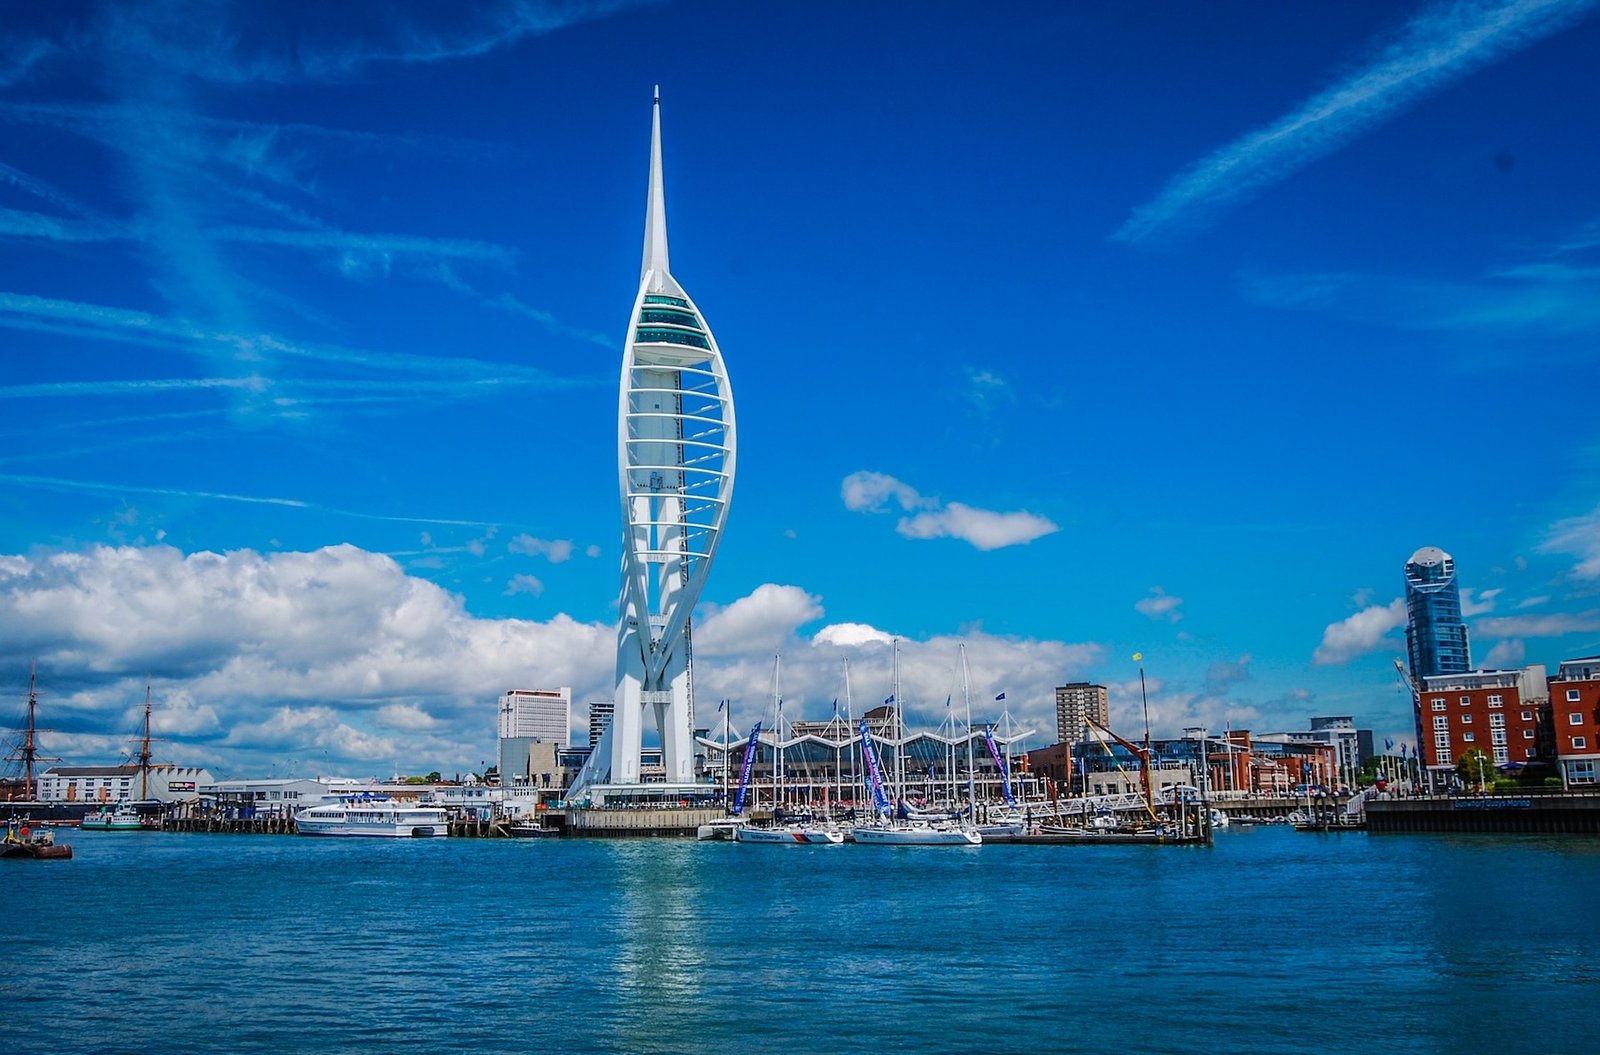 Where to Stay in Portsmouth